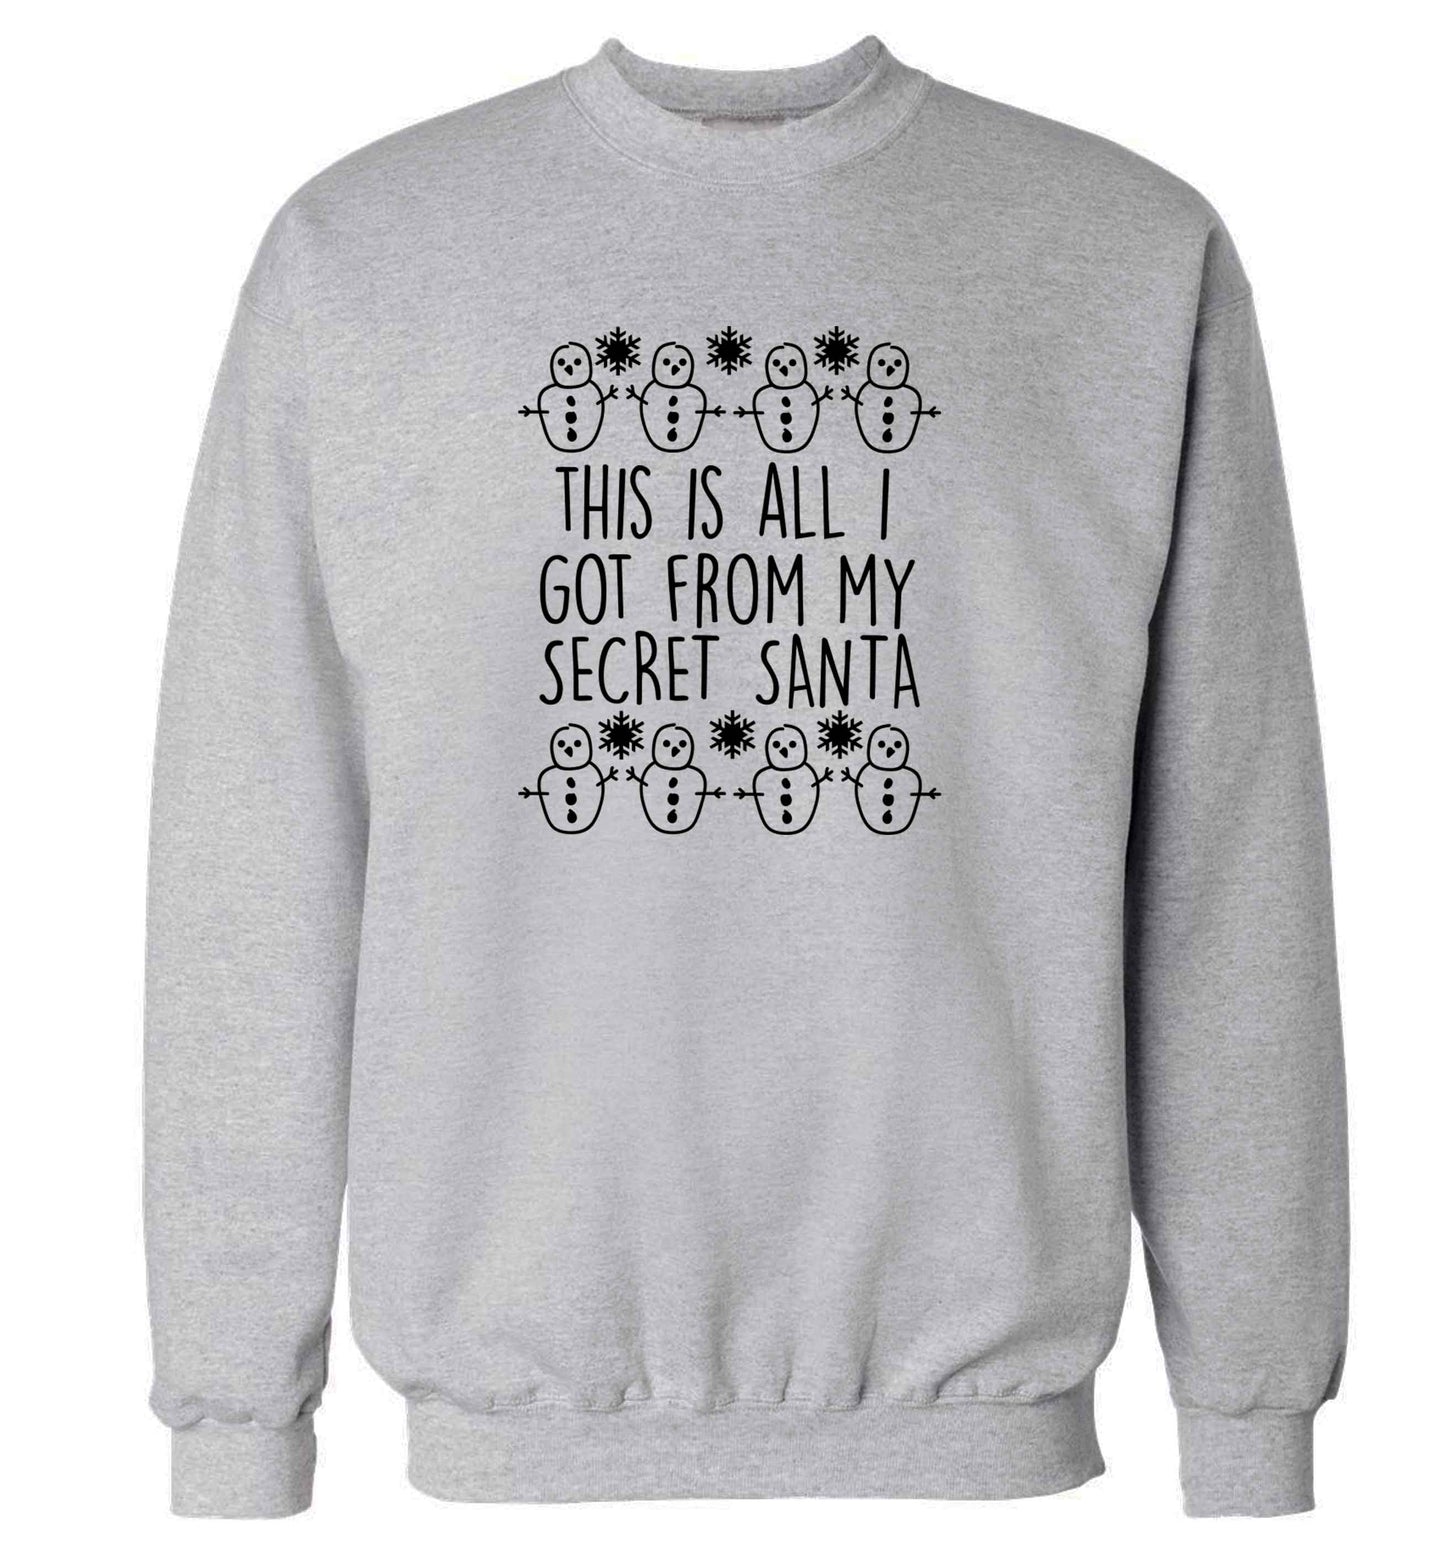 This is all I got from my secret Santa adult's unisex grey sweater 2XL